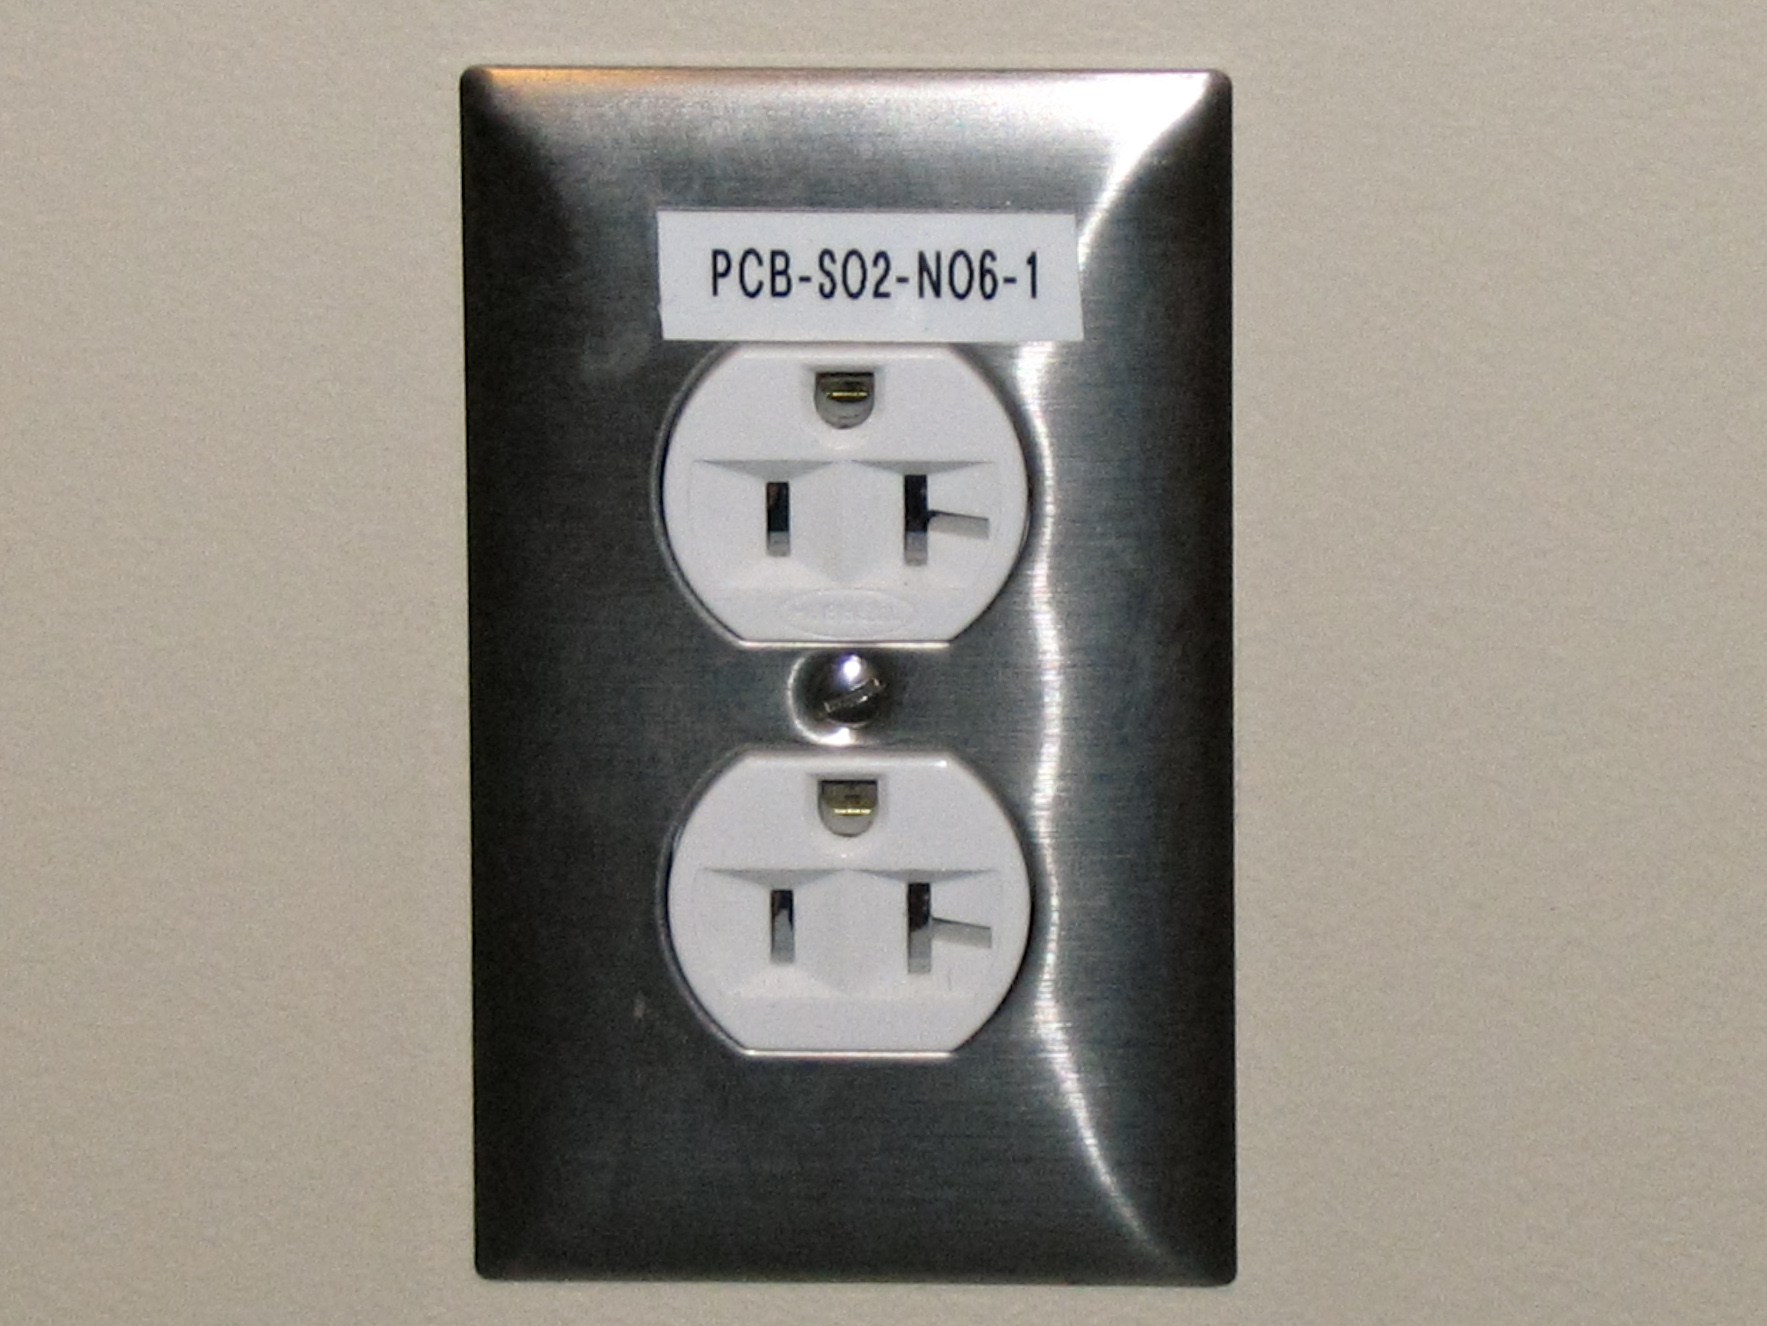 File:Electrical outlet with label.jpg - Wikimedia Commons